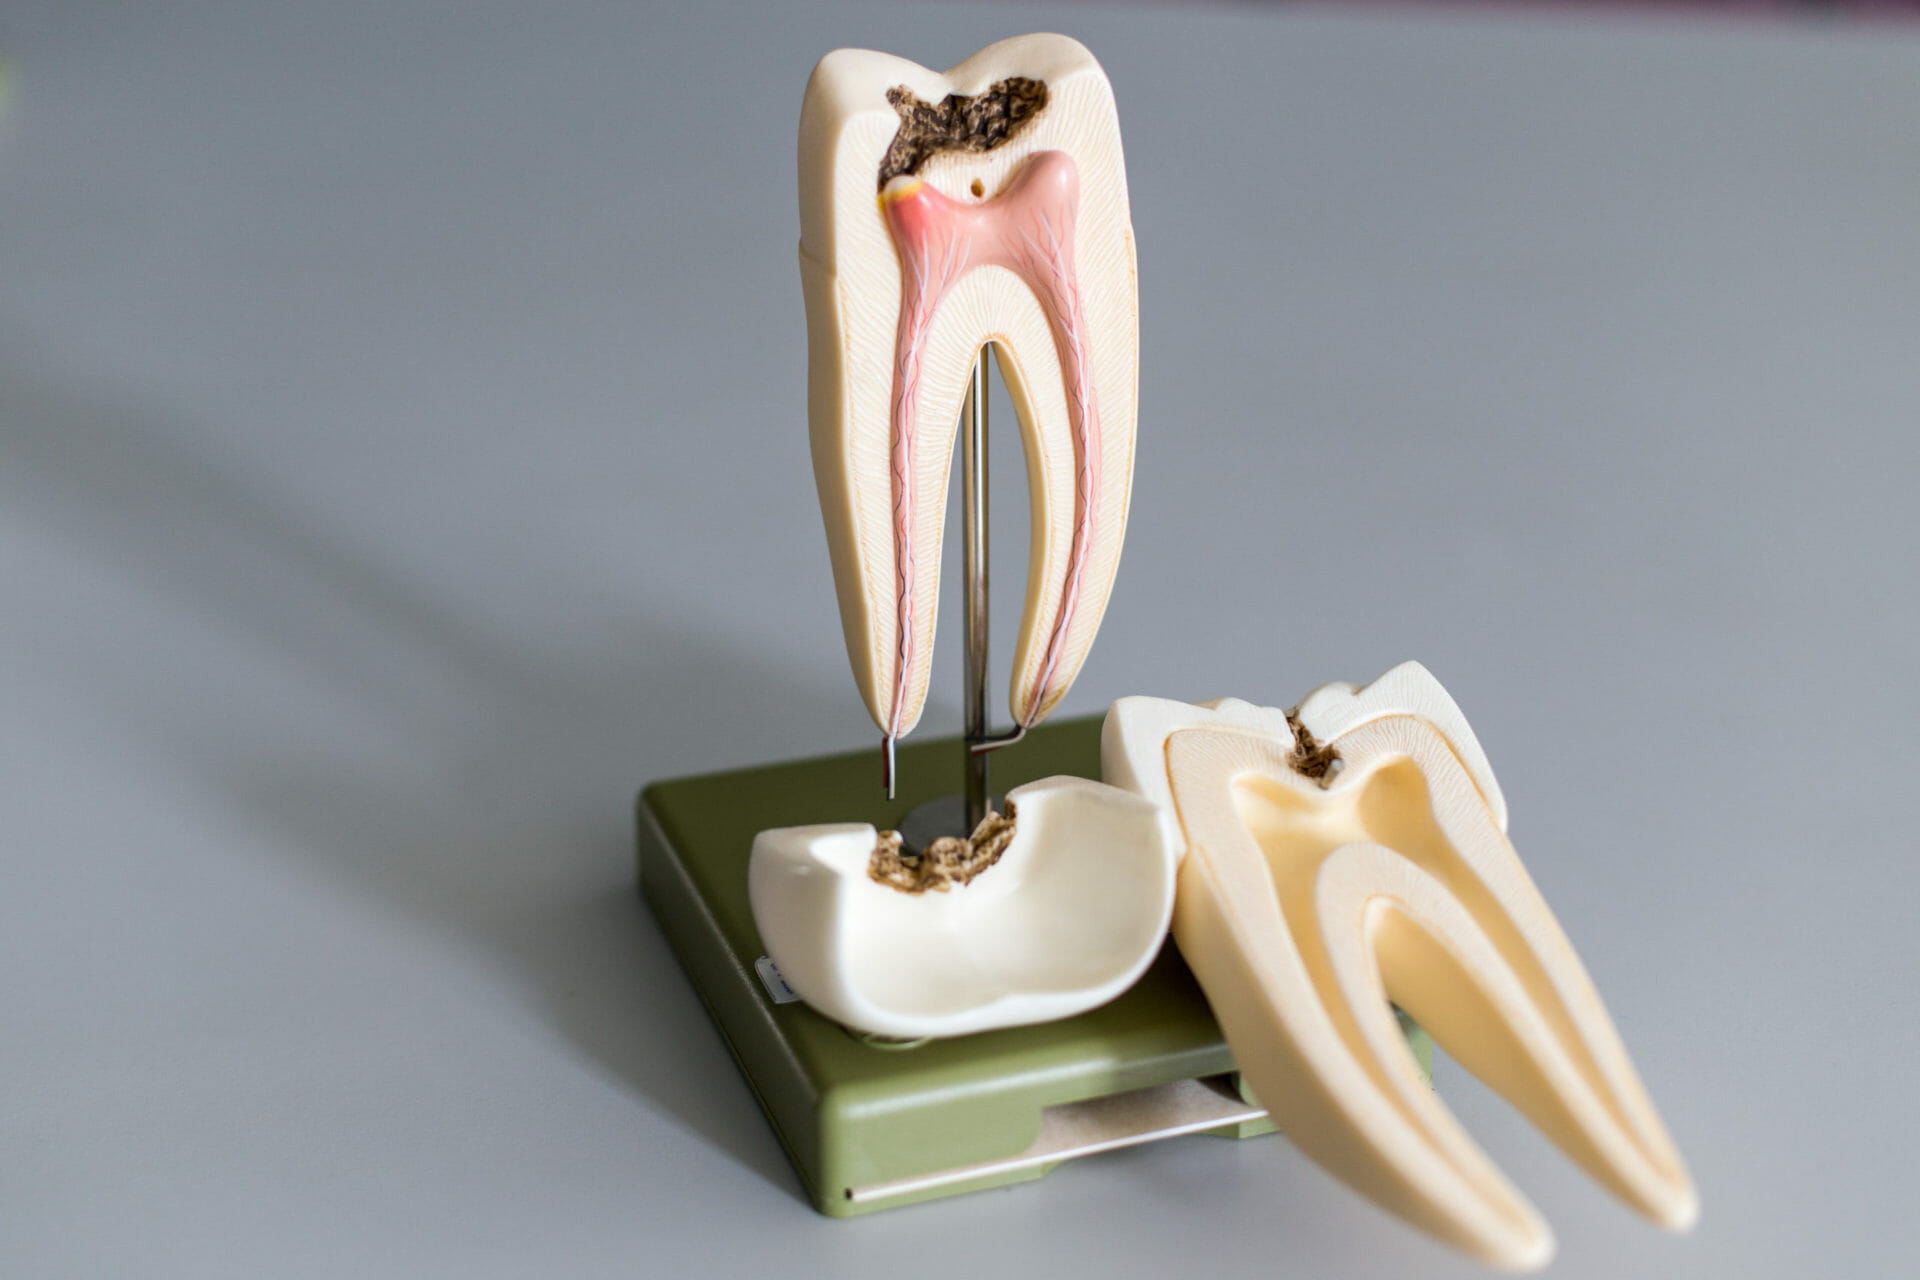 root canal therapy in houston - fms dental